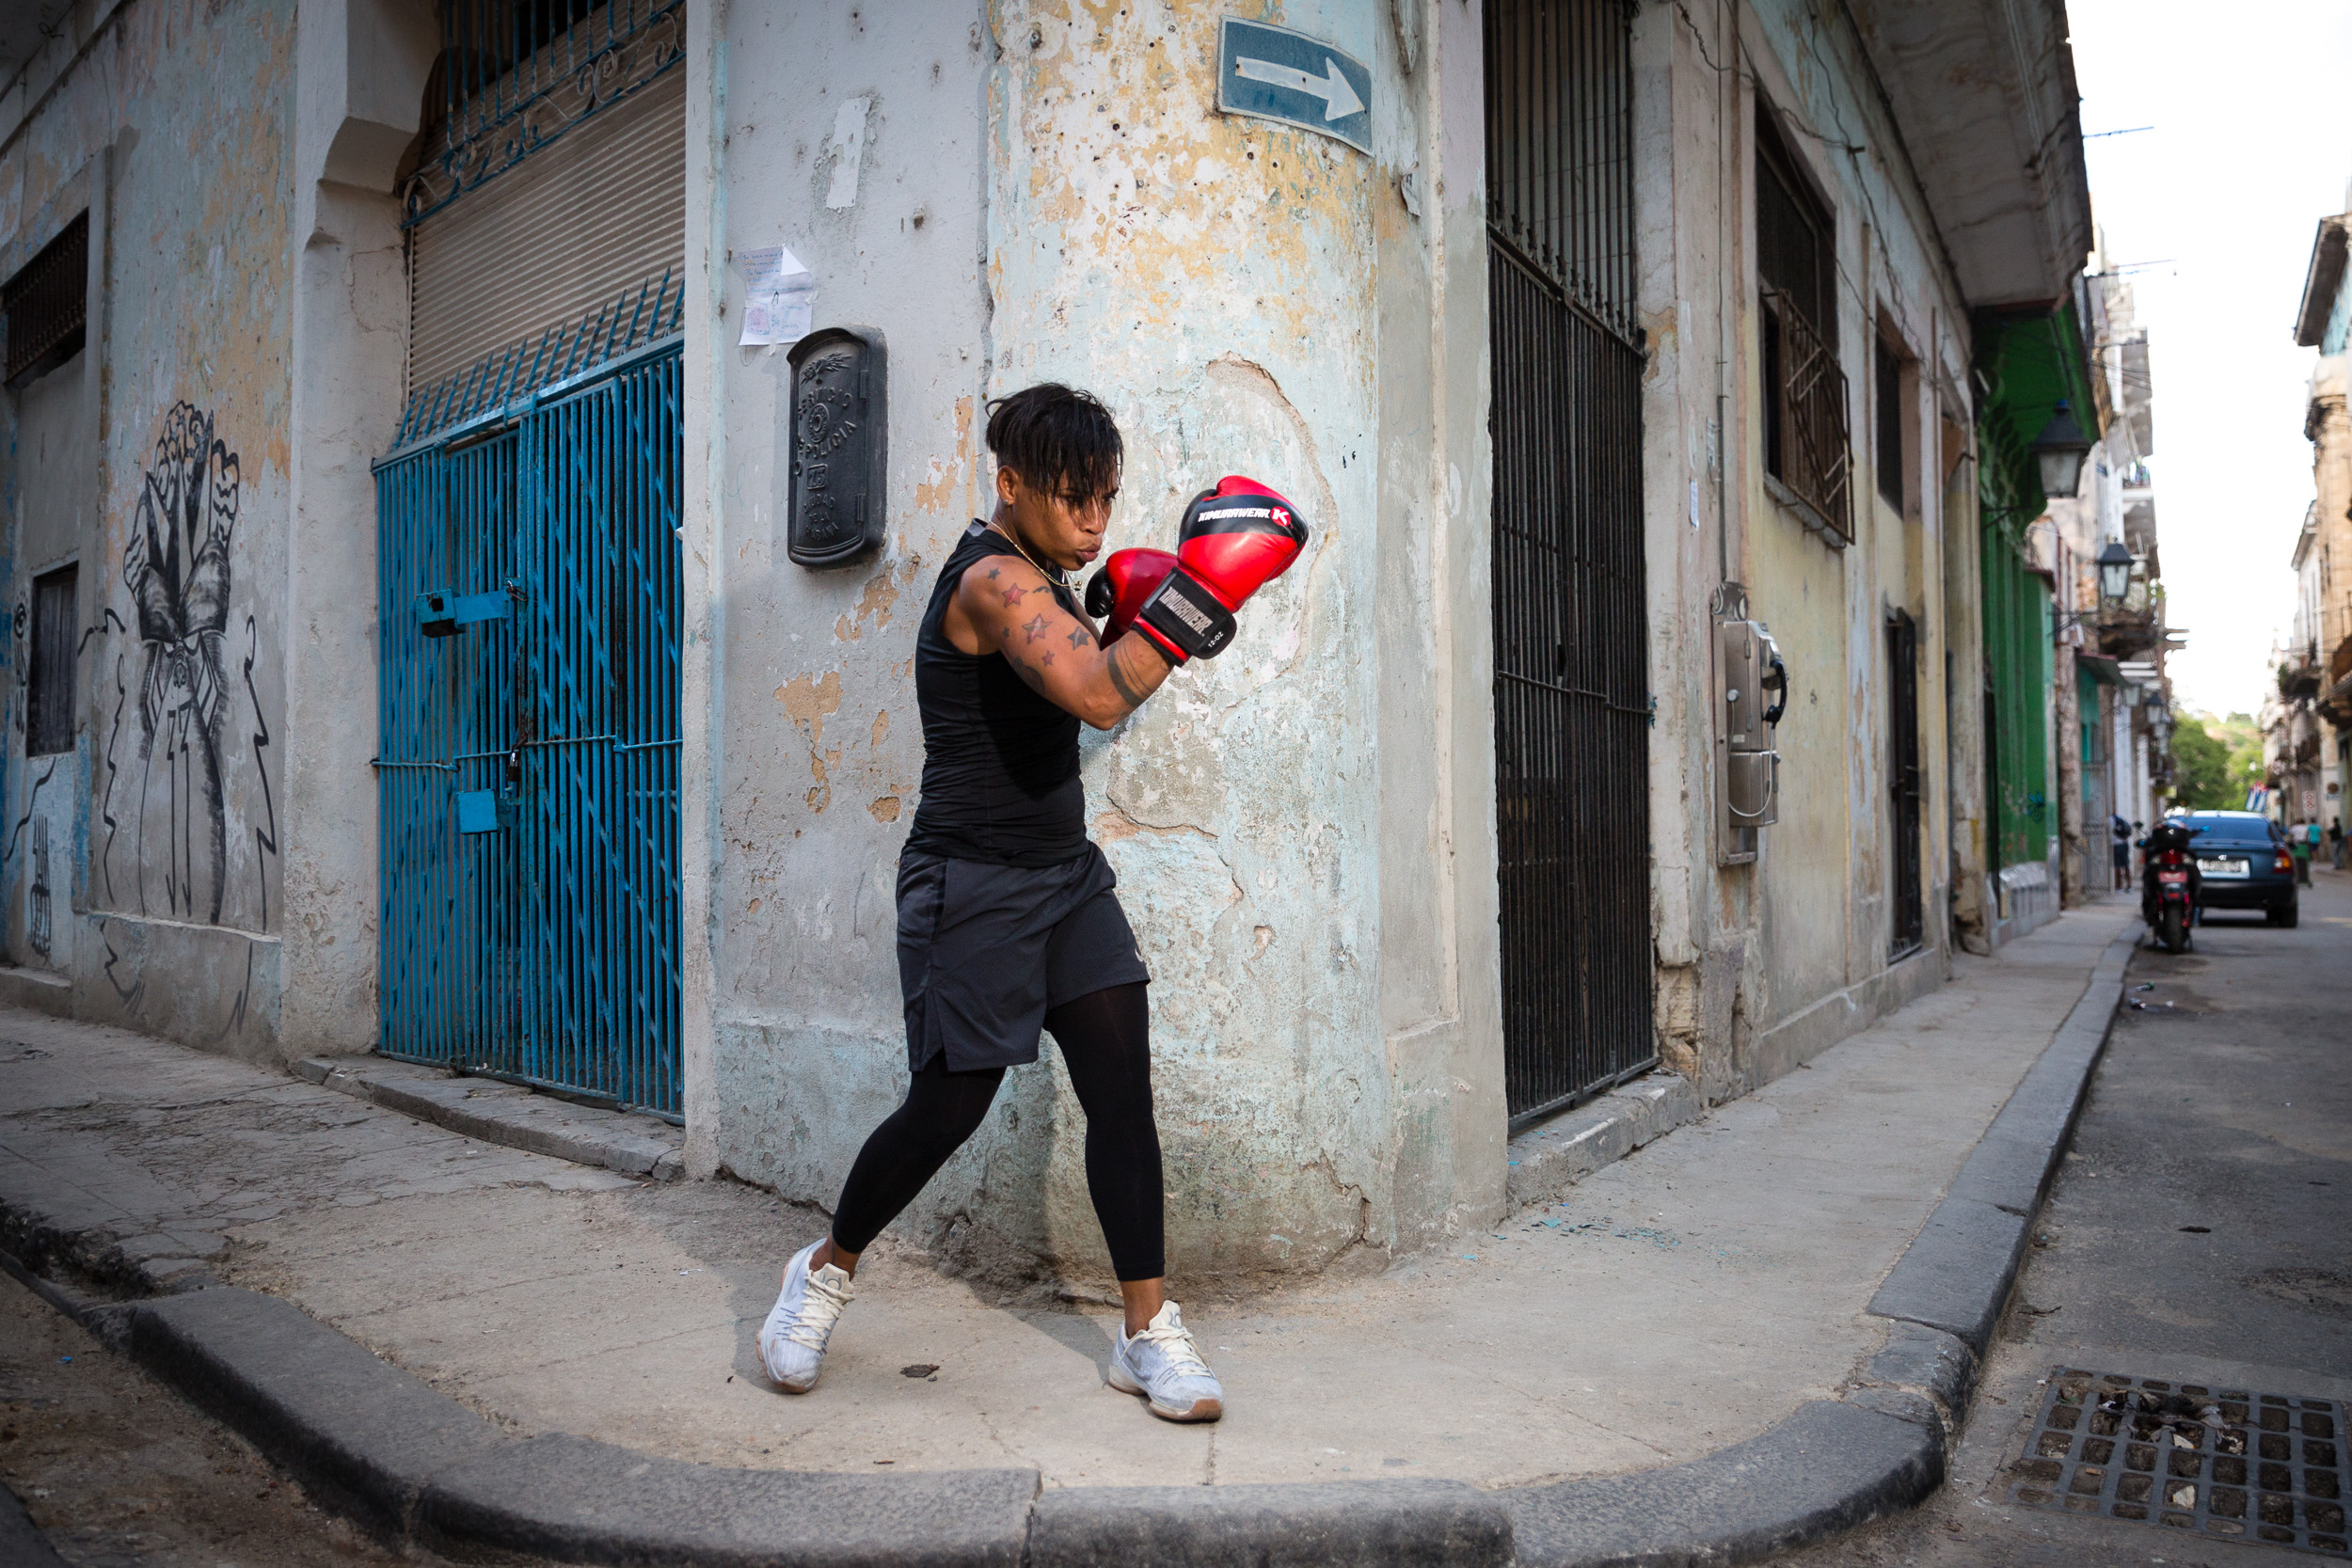  We took the famous Cuban boxer Namibia out into the streets.  